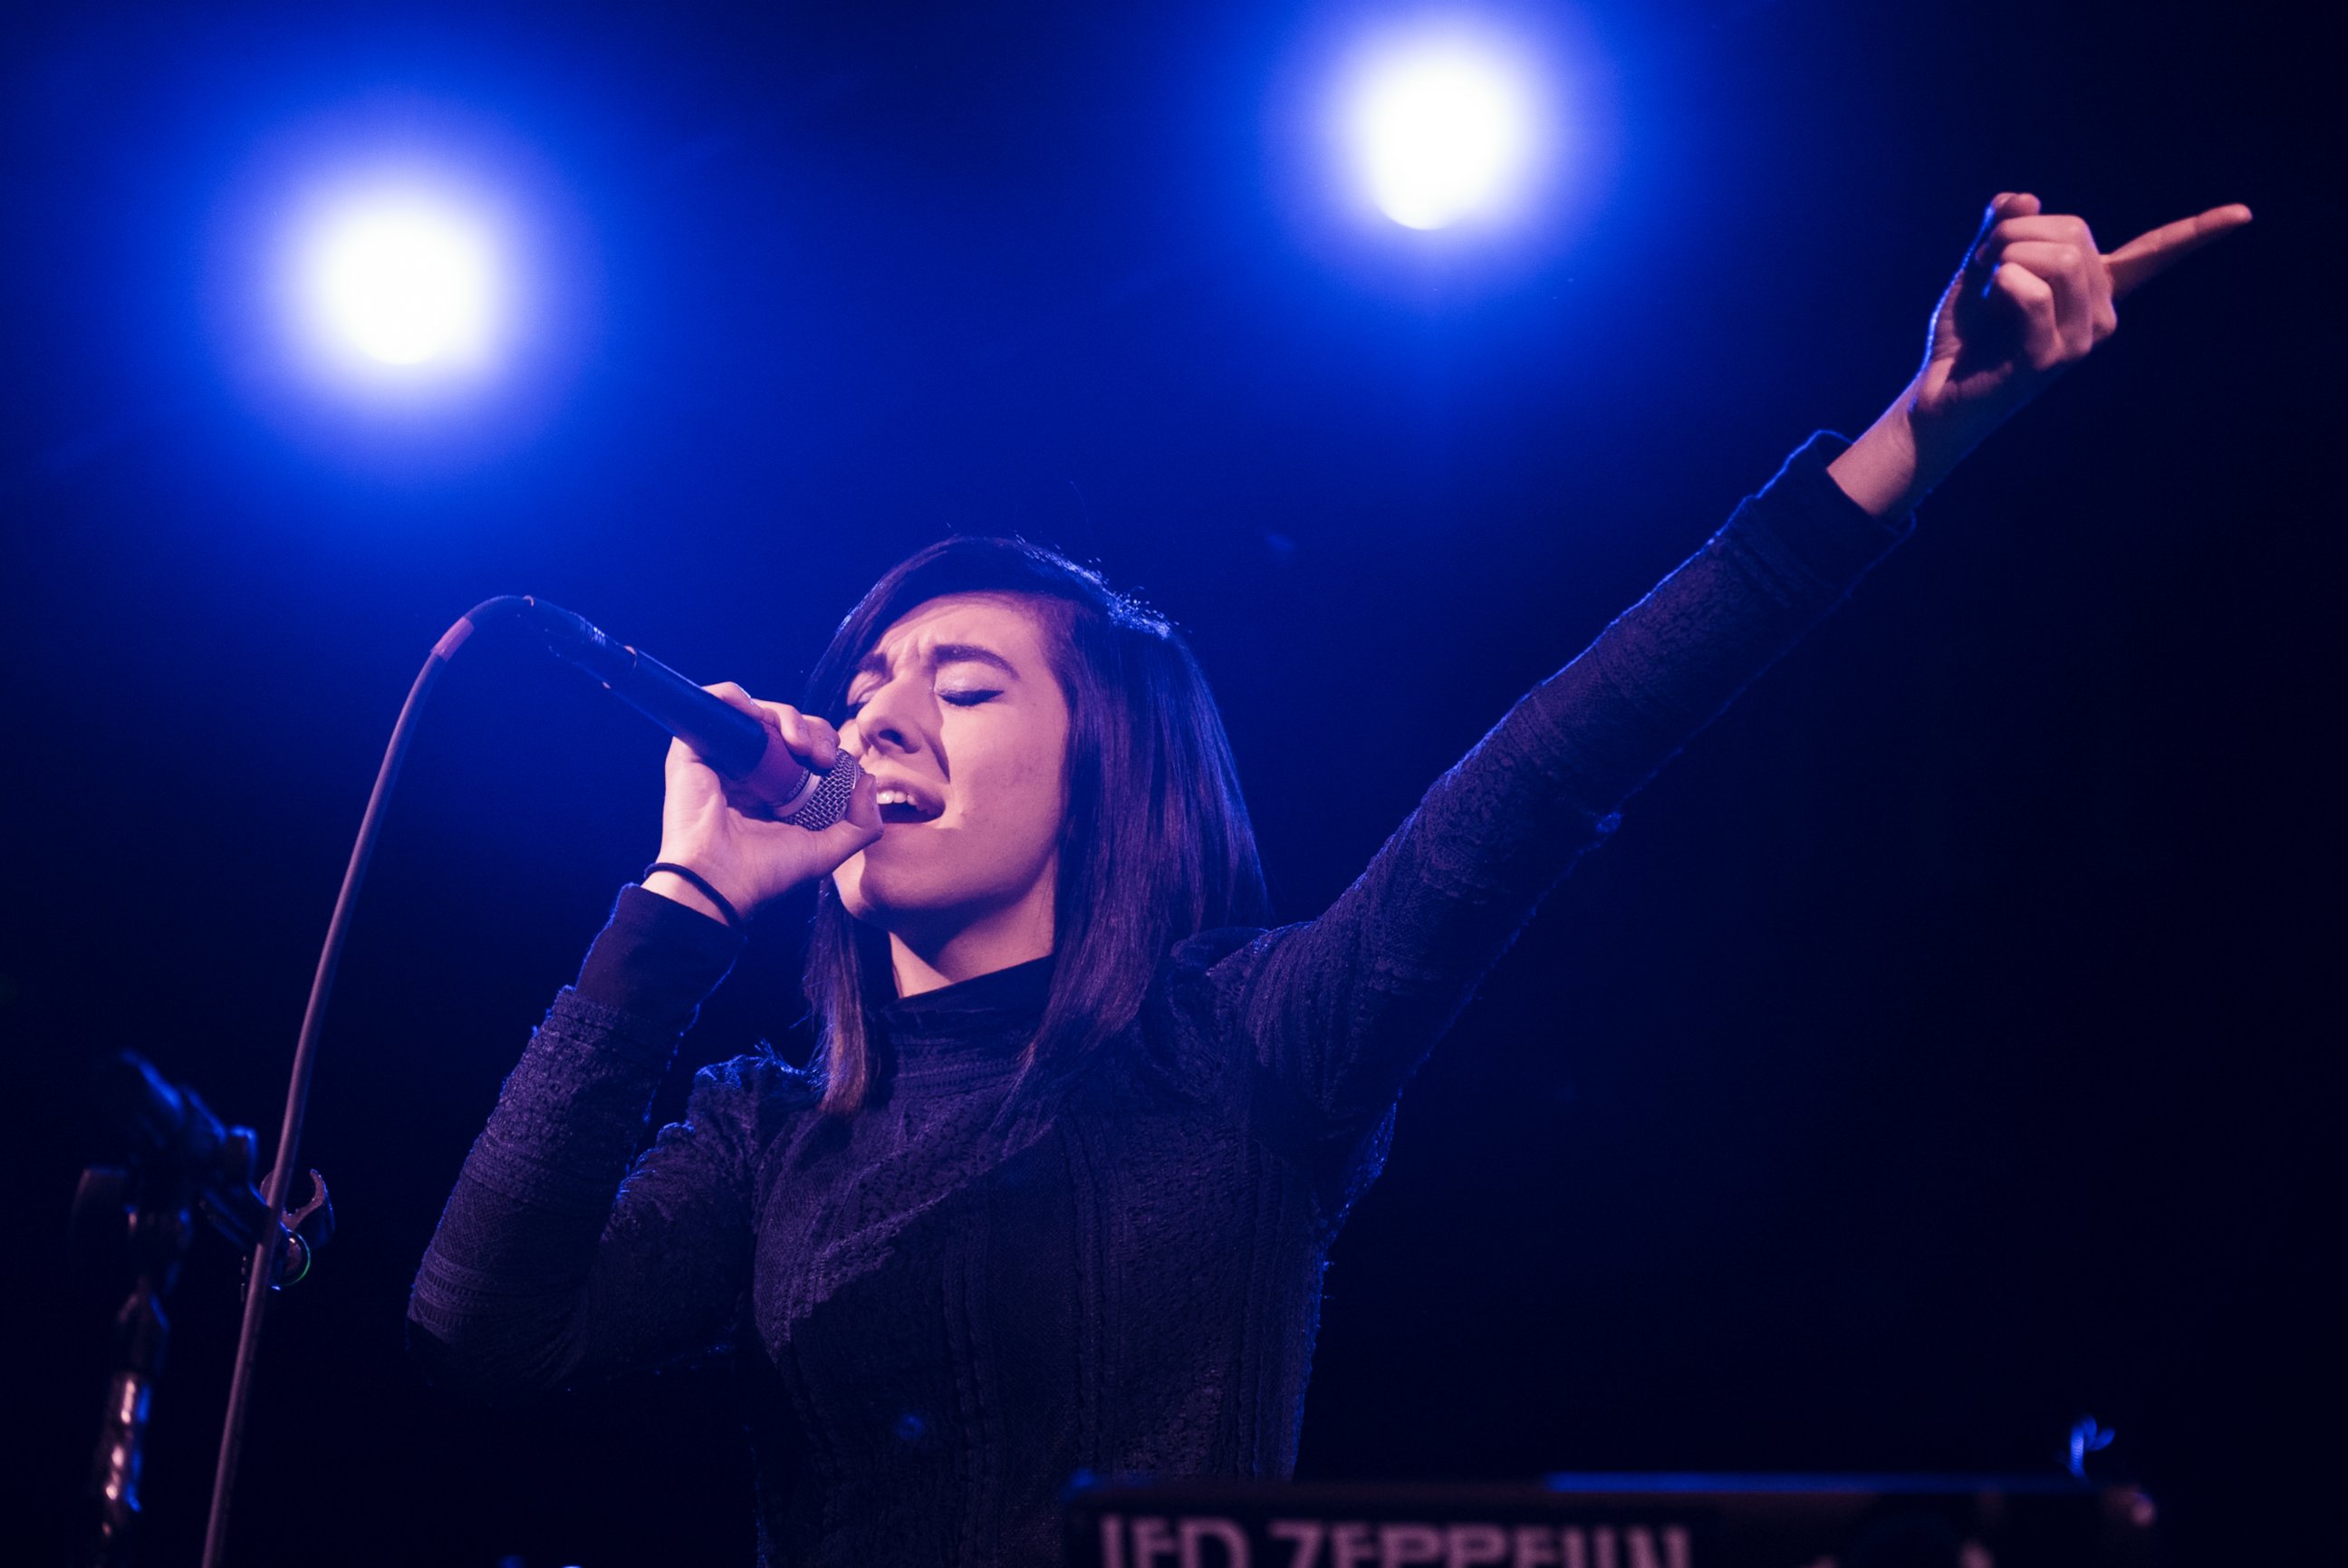 PHOTO: Singer Christina Grimmie performs in concert at Irving Plaza, March 10, 2016 in New York City.